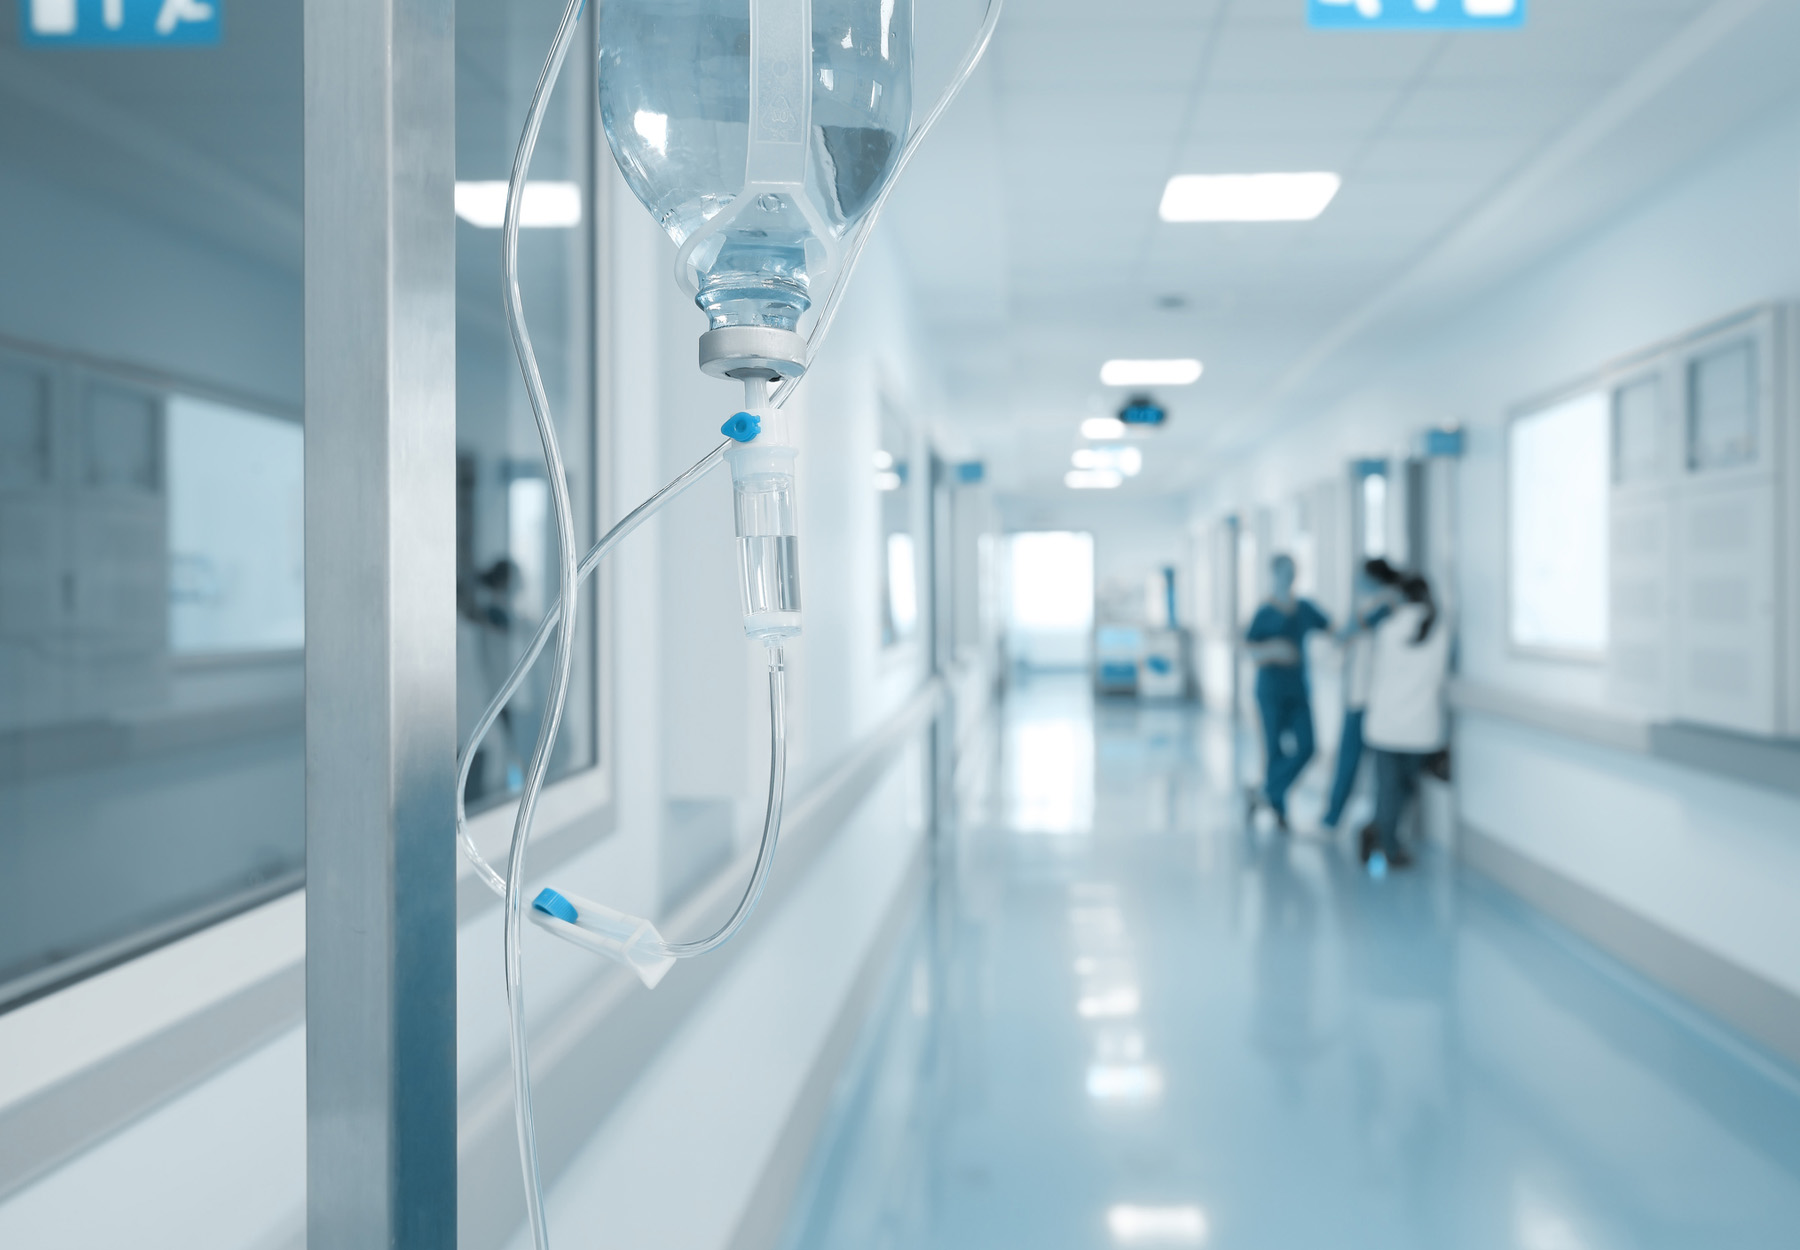 Hospital hallway with IV in the foreground and a group of staff meeting in the background. Stock image.